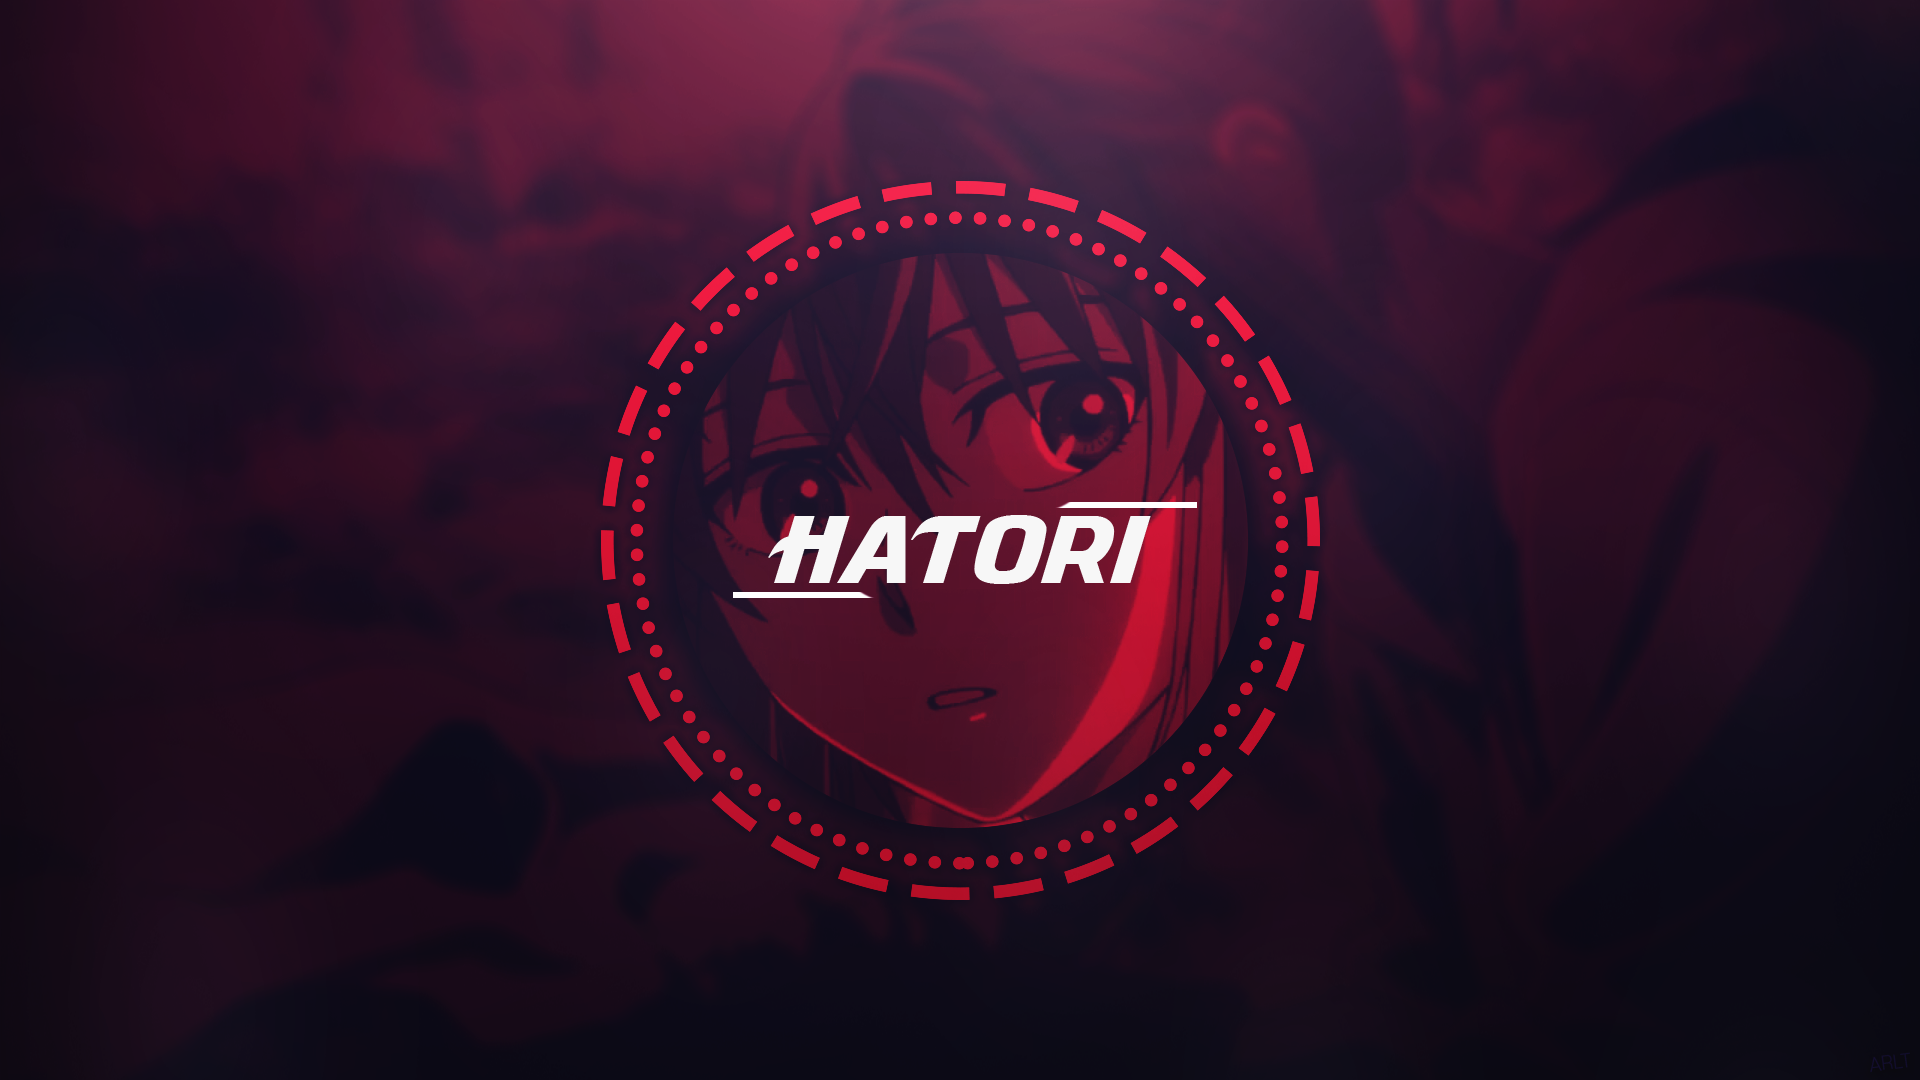 Anime 1920x1080 anime girls Hatori Chise anime picture-in-picture